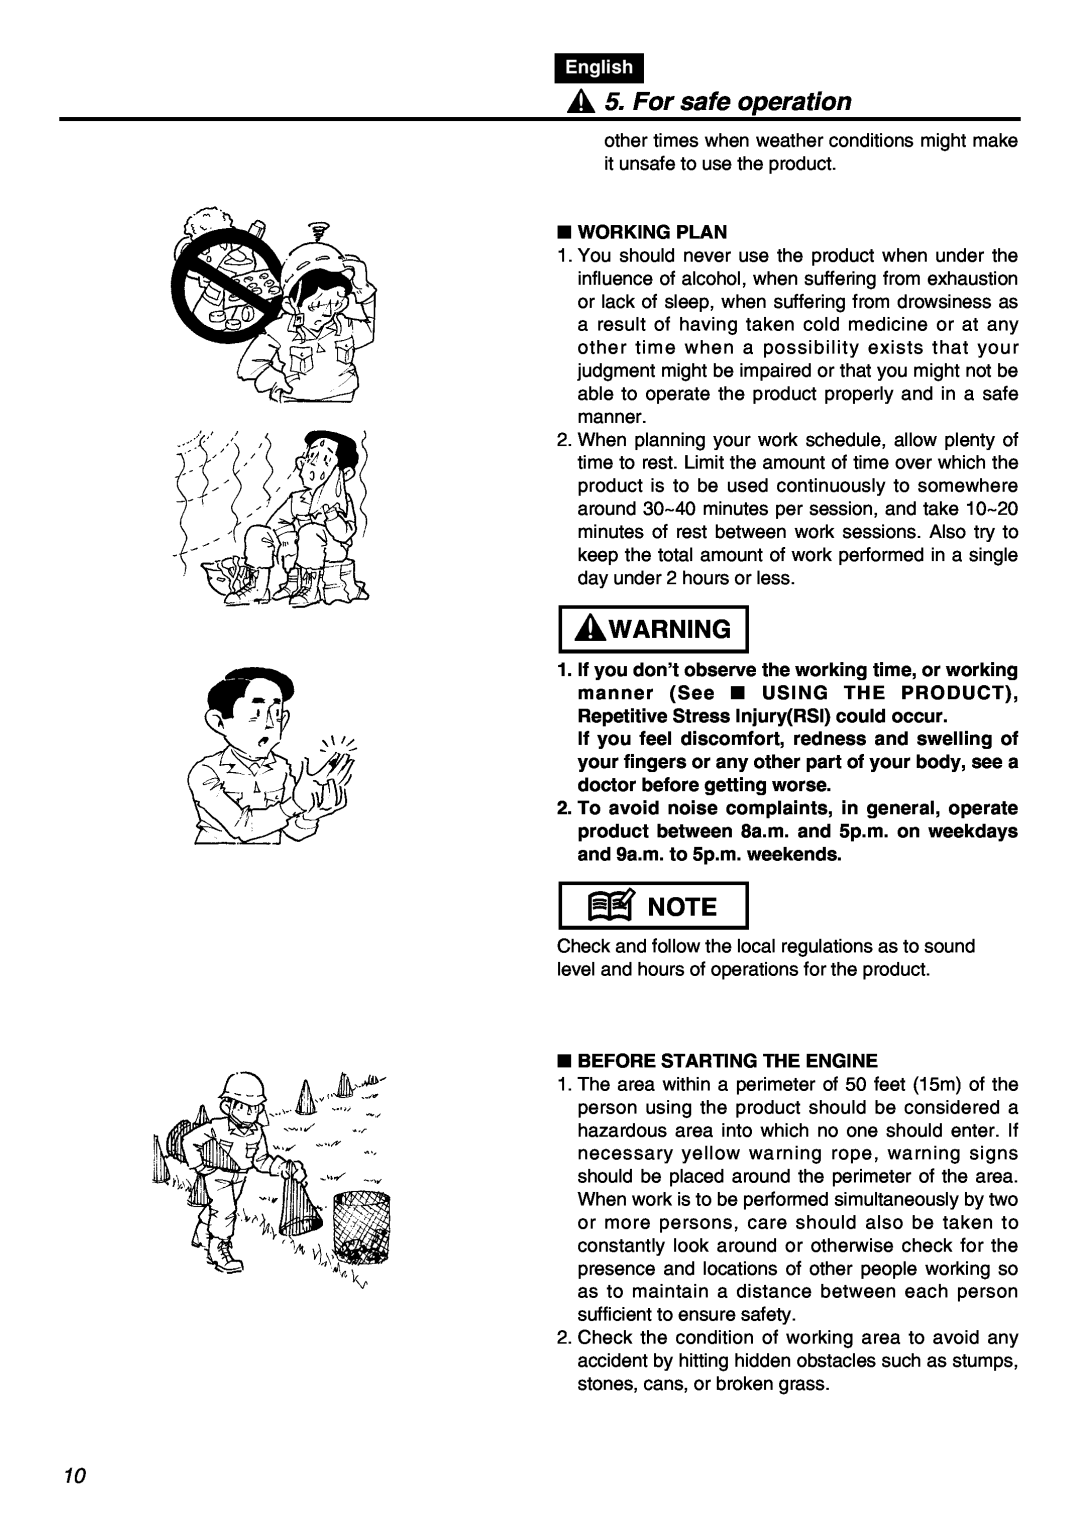 RedMax BCZ2401S-CA manual For safe operation, English, Working Plan, Repetitive Stress InjuryRSI could occur 